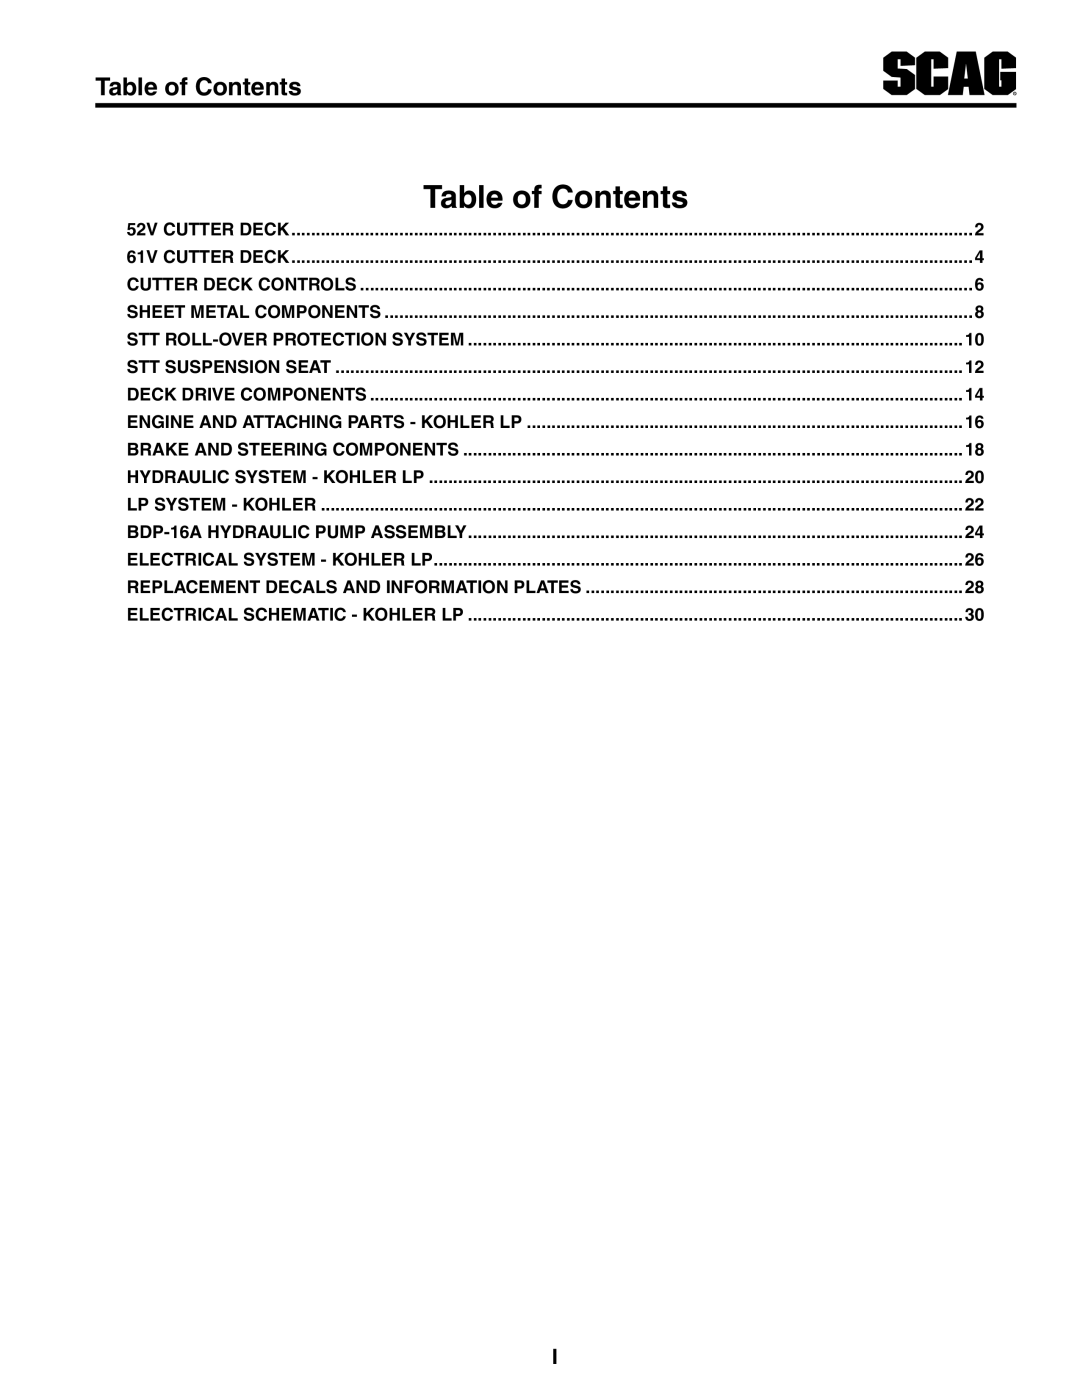 Scag Power Equipment STT-25CH-LP manual Table of Contents 